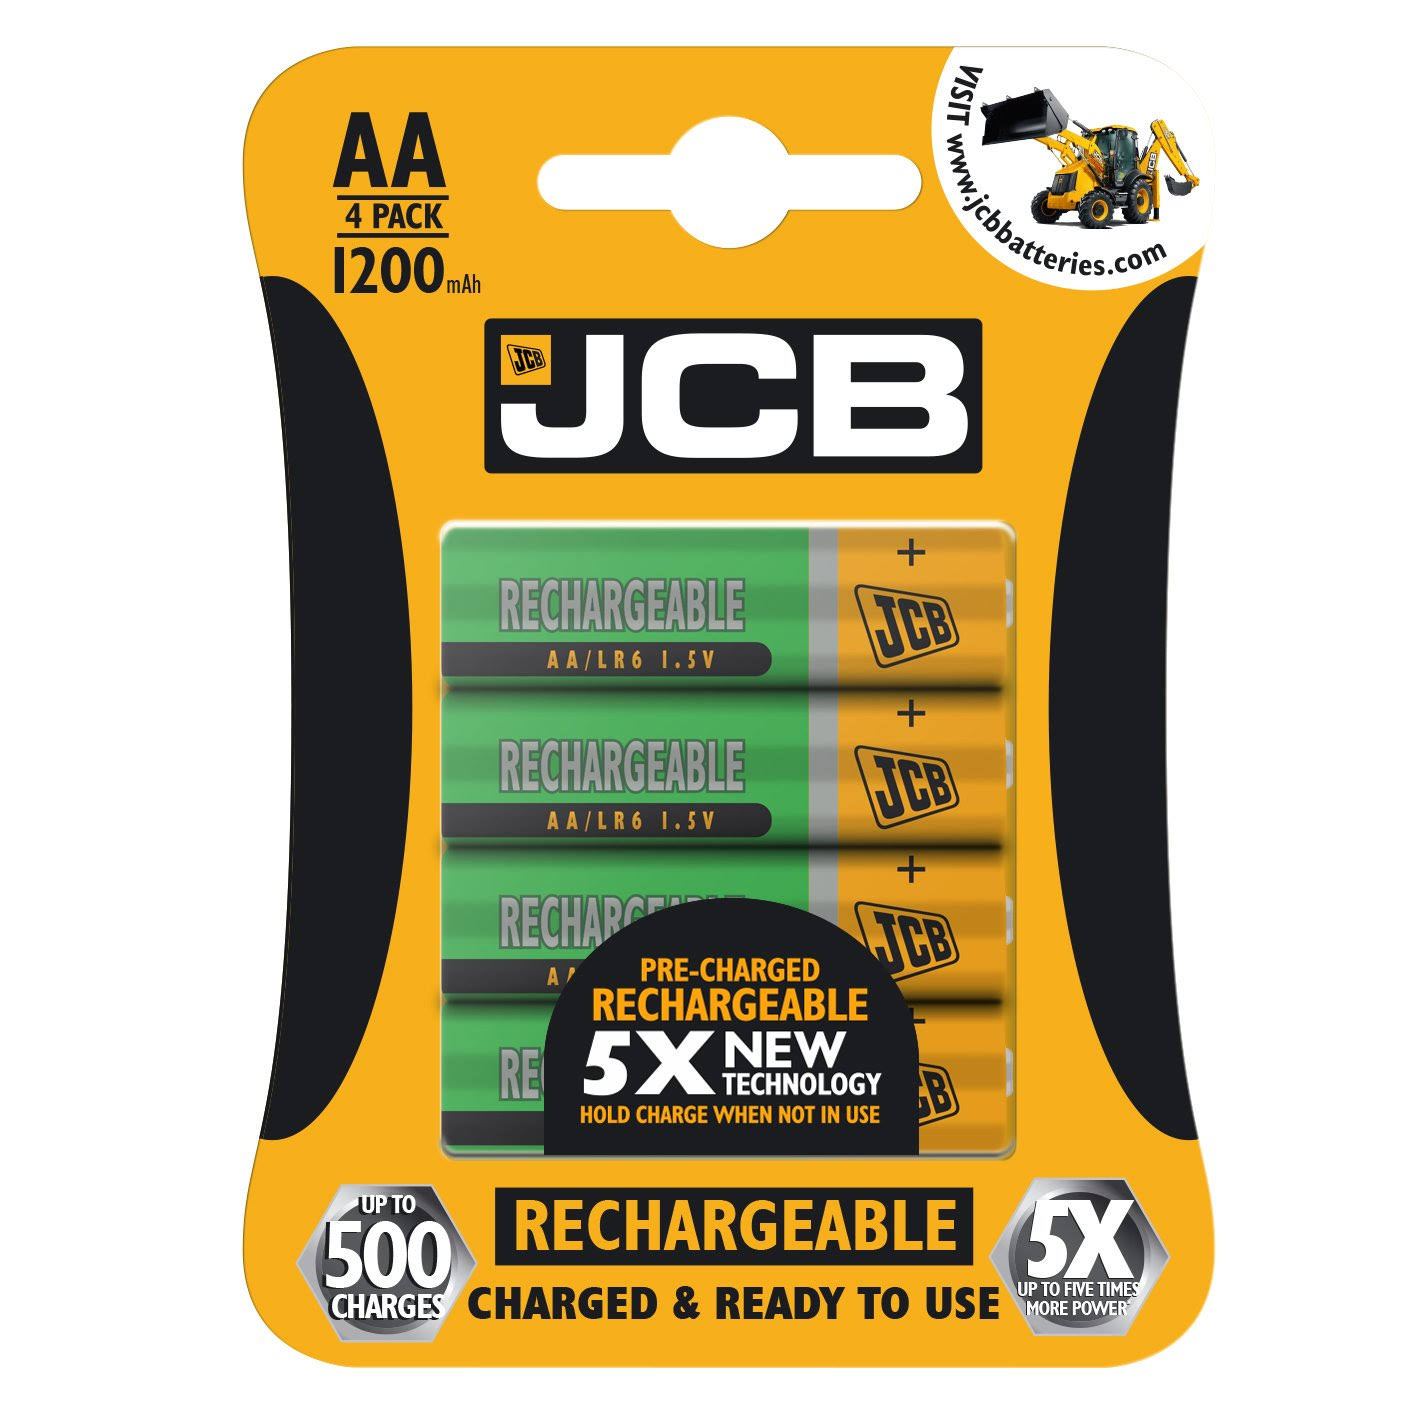 JCB Rechargeable AA Battery - x4